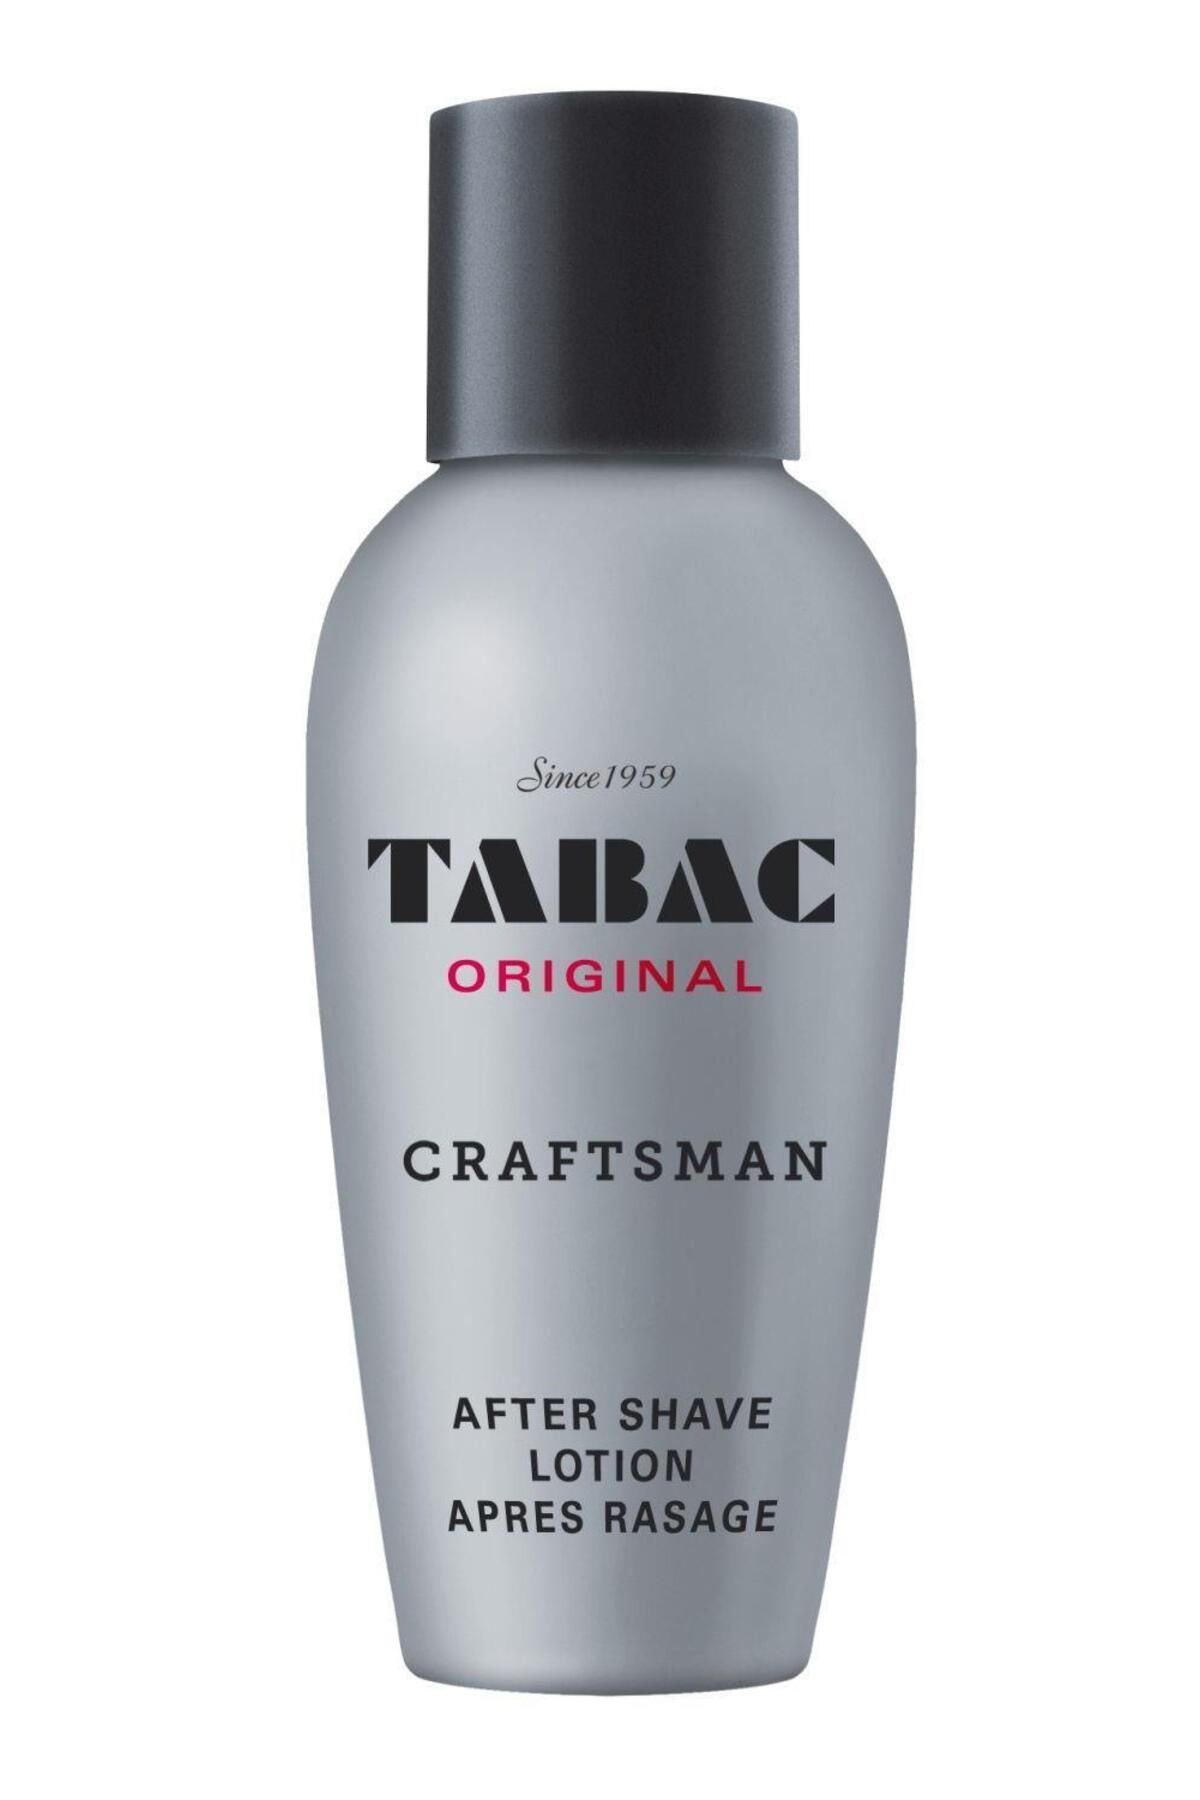 Tabac Craftsman After Shave Lotion 150 ml